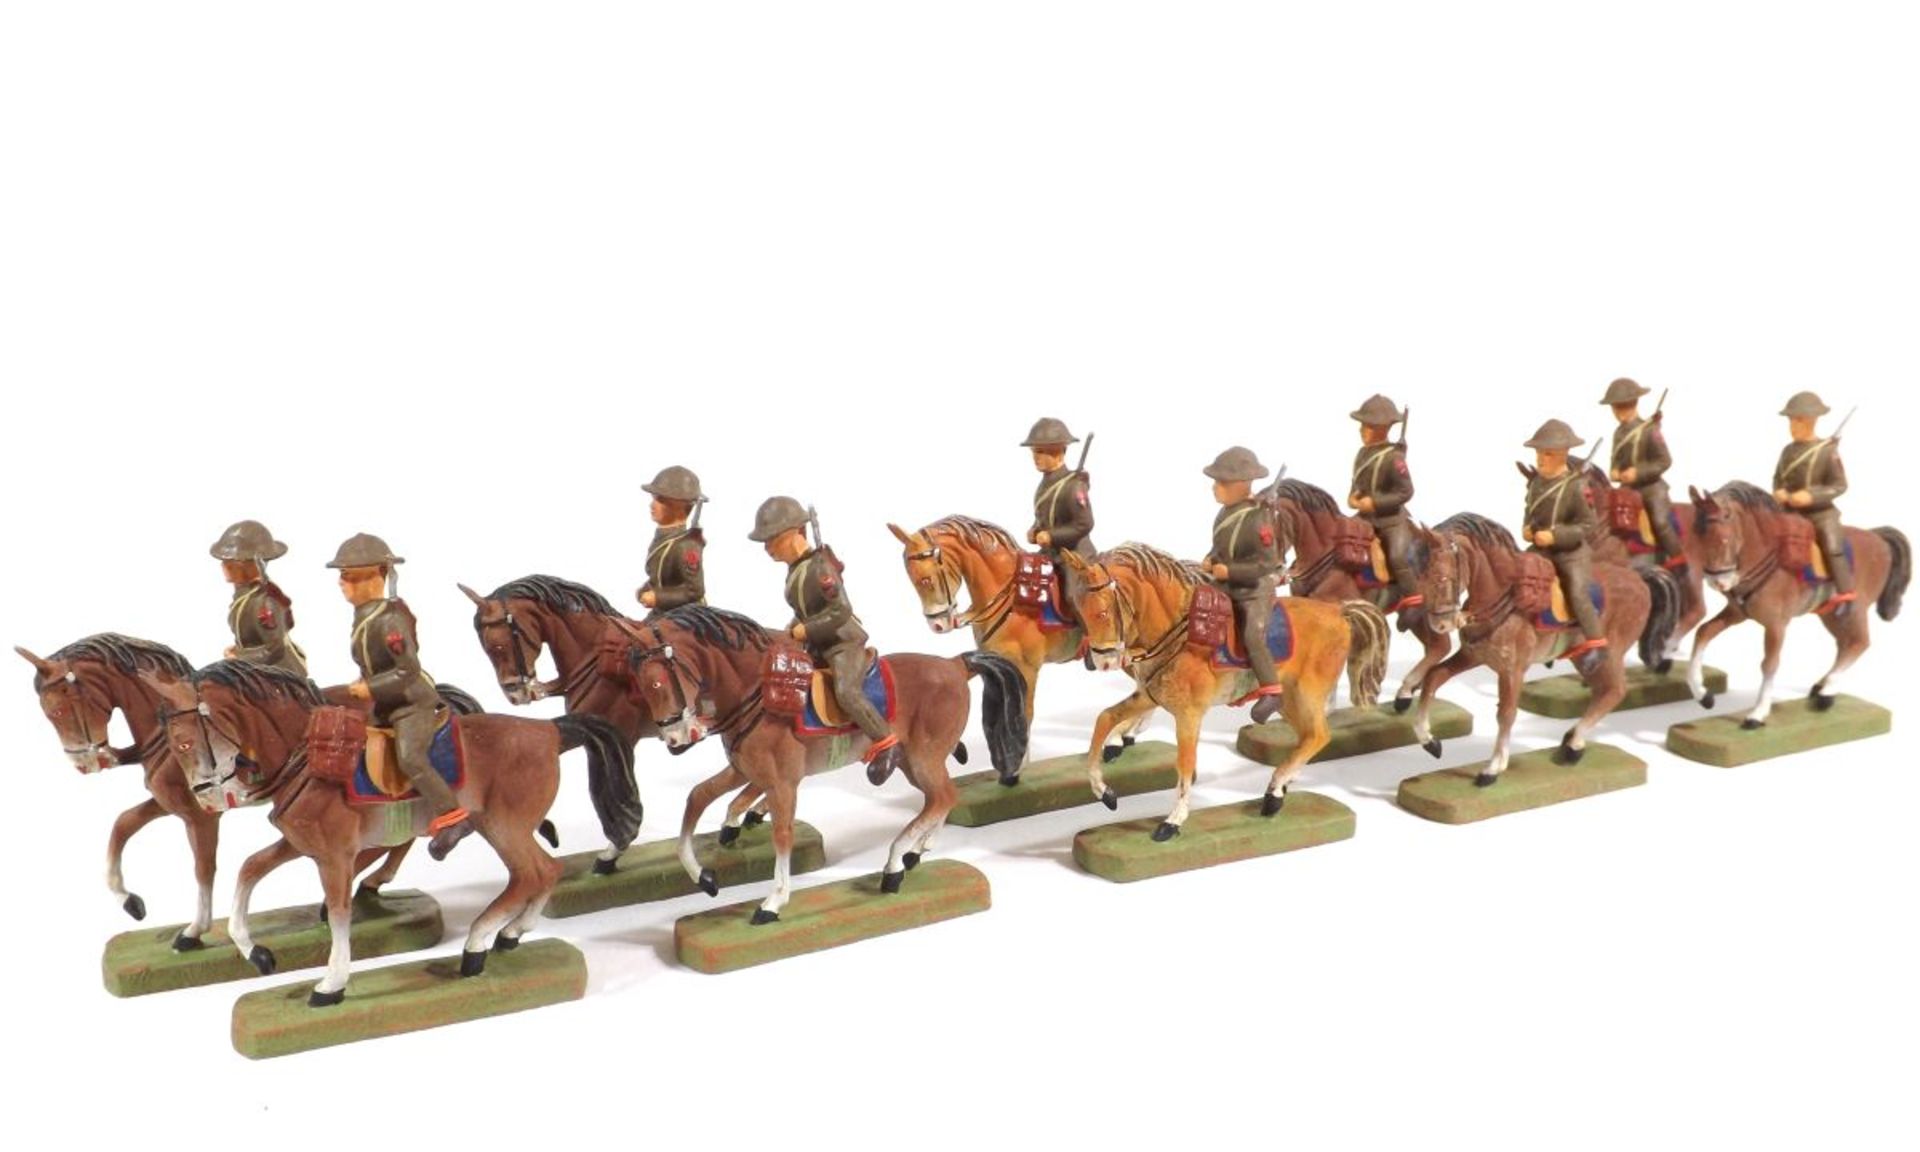 USA, cavalry, Lineol or Elastolin or others, composition figures, 7-7,5 cm size, made in Germany aft